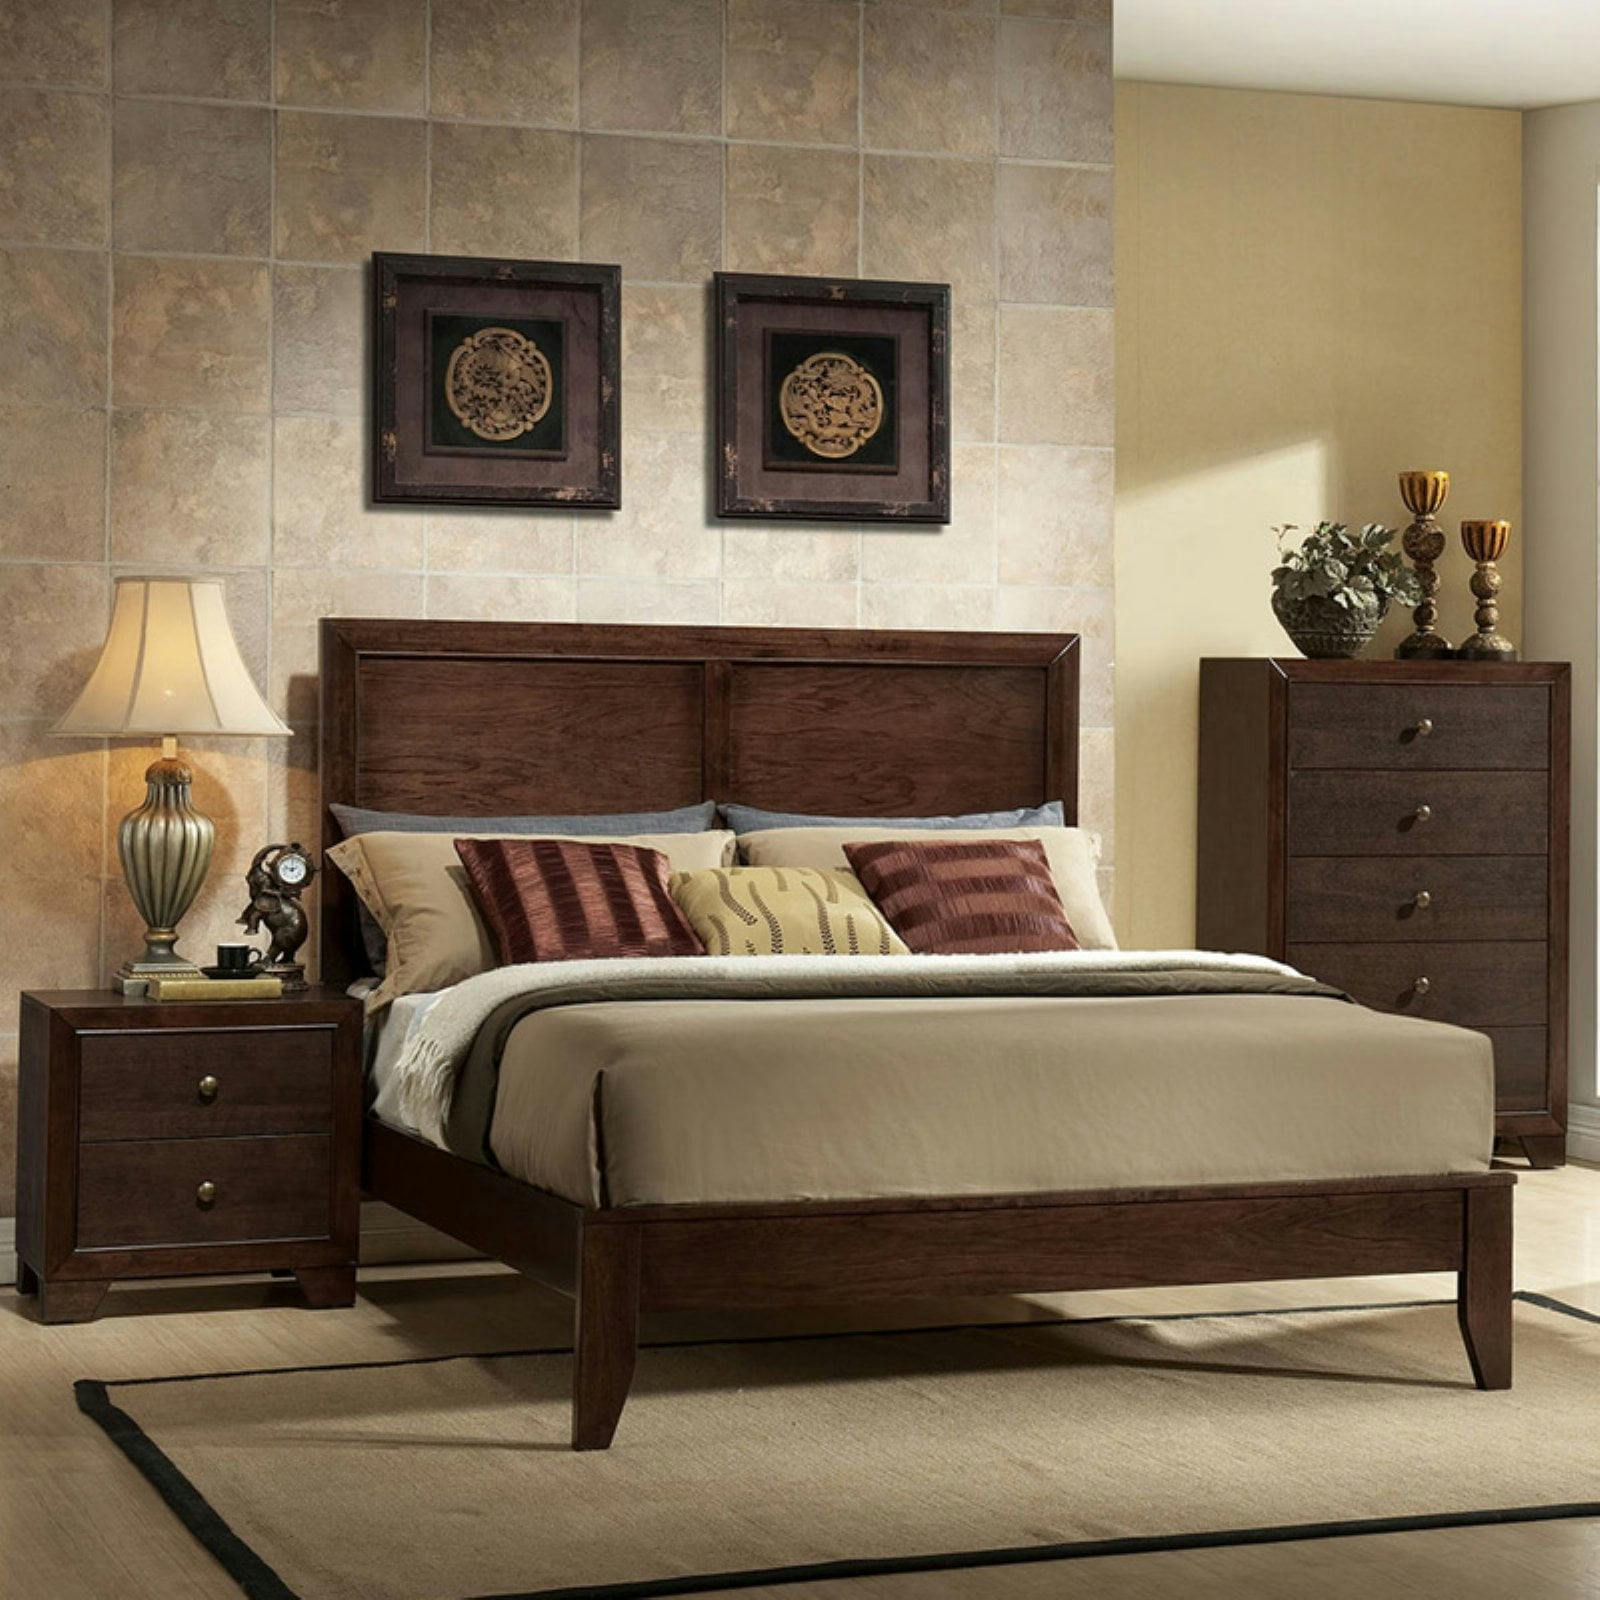 Espresso King Bed with Wood Frame and Storage Drawer